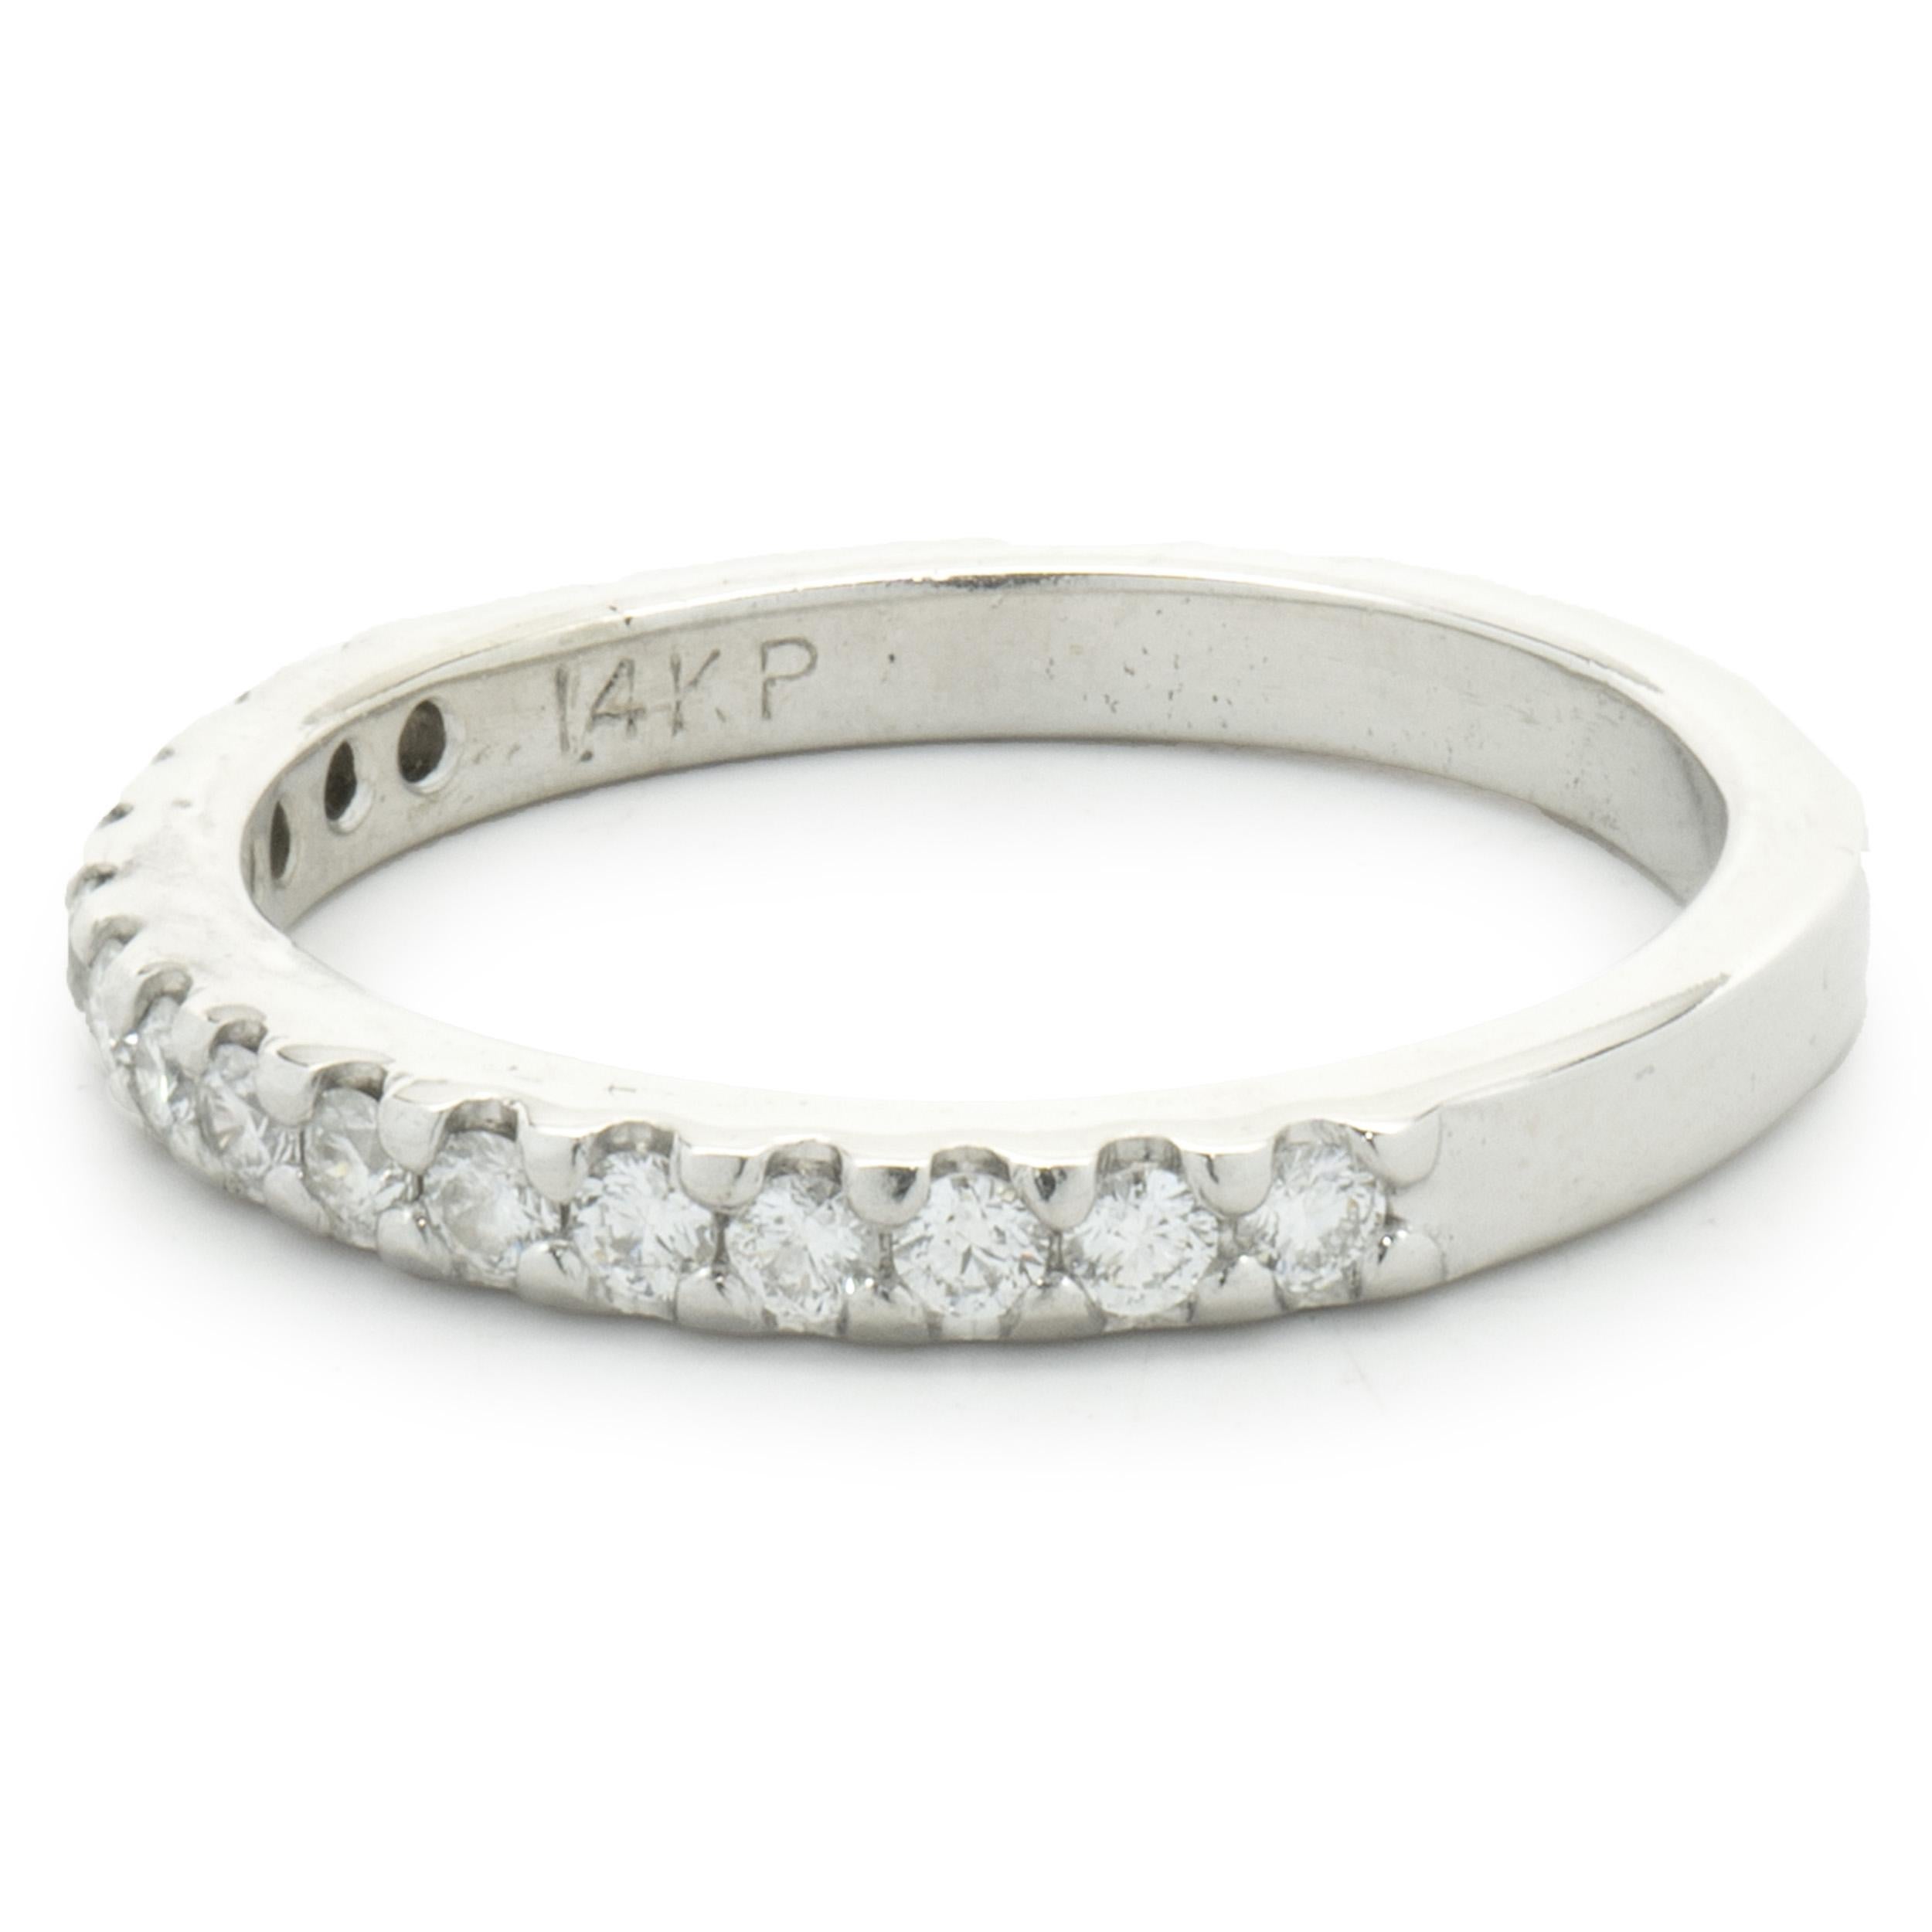 Designer: Custom
Material: 14K white gold
Diamonds: 15 round brilliant cut = 0.35cttw
Color: G
Clarity: VS2
Size: 6.5 sizing available 
Dimensions: ring measures 2.4mm in width
Weight: 2.62 grams